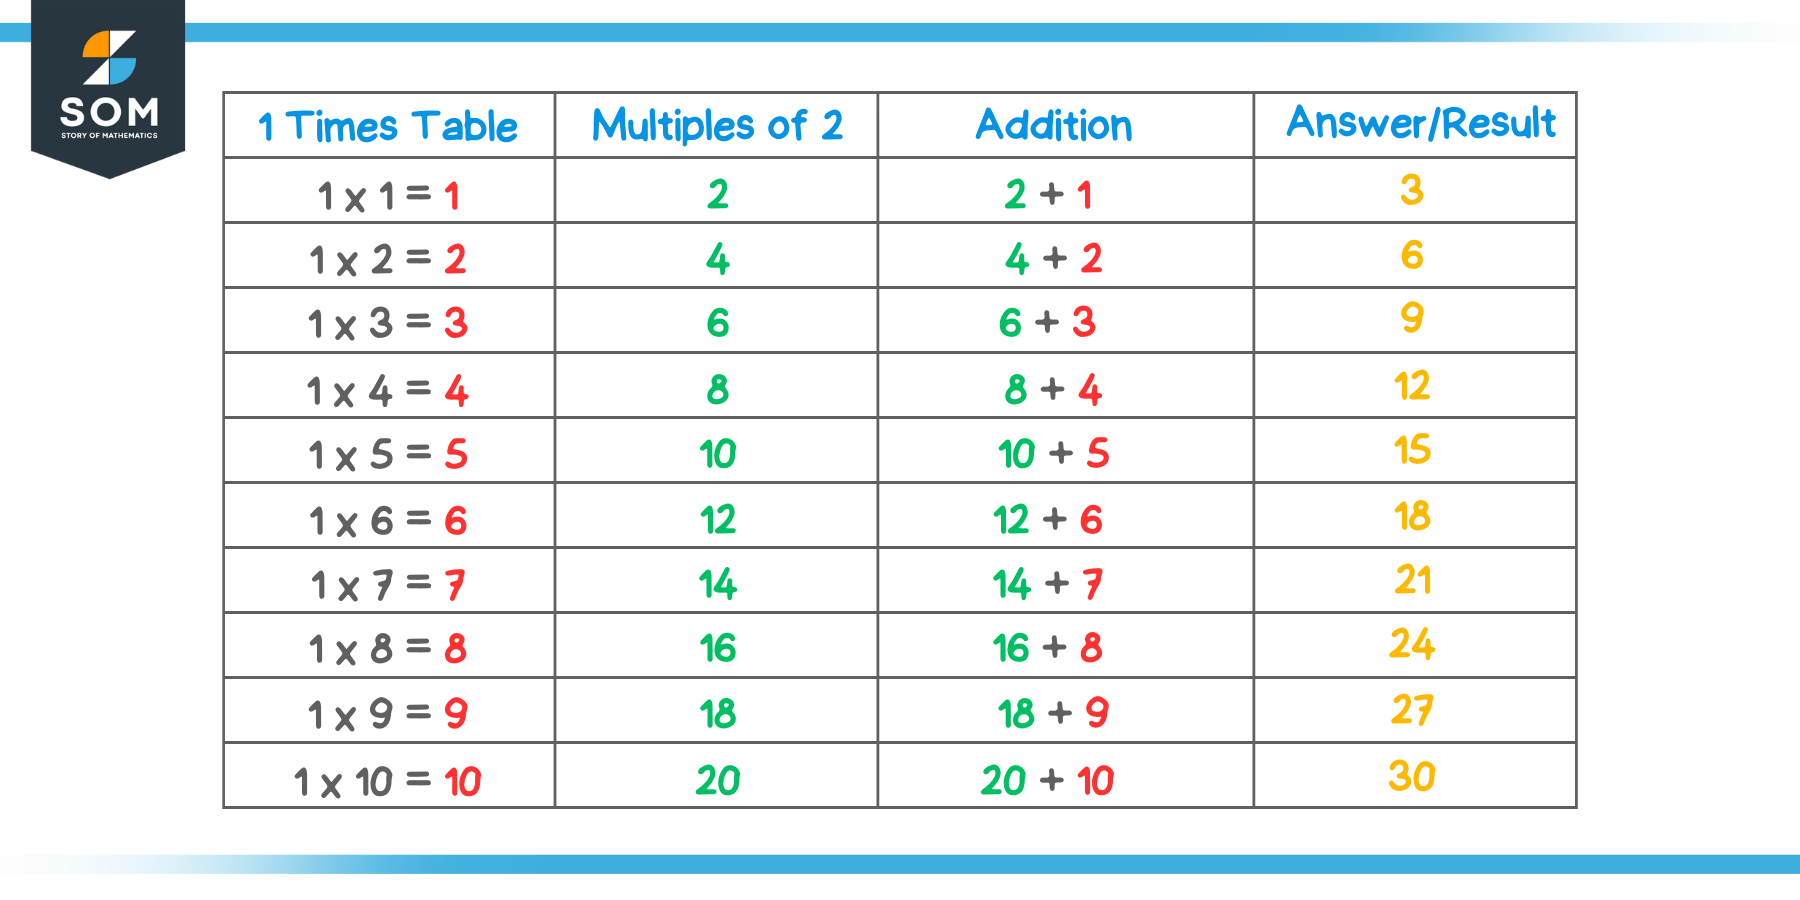 3 Times Table using 1 Times Table